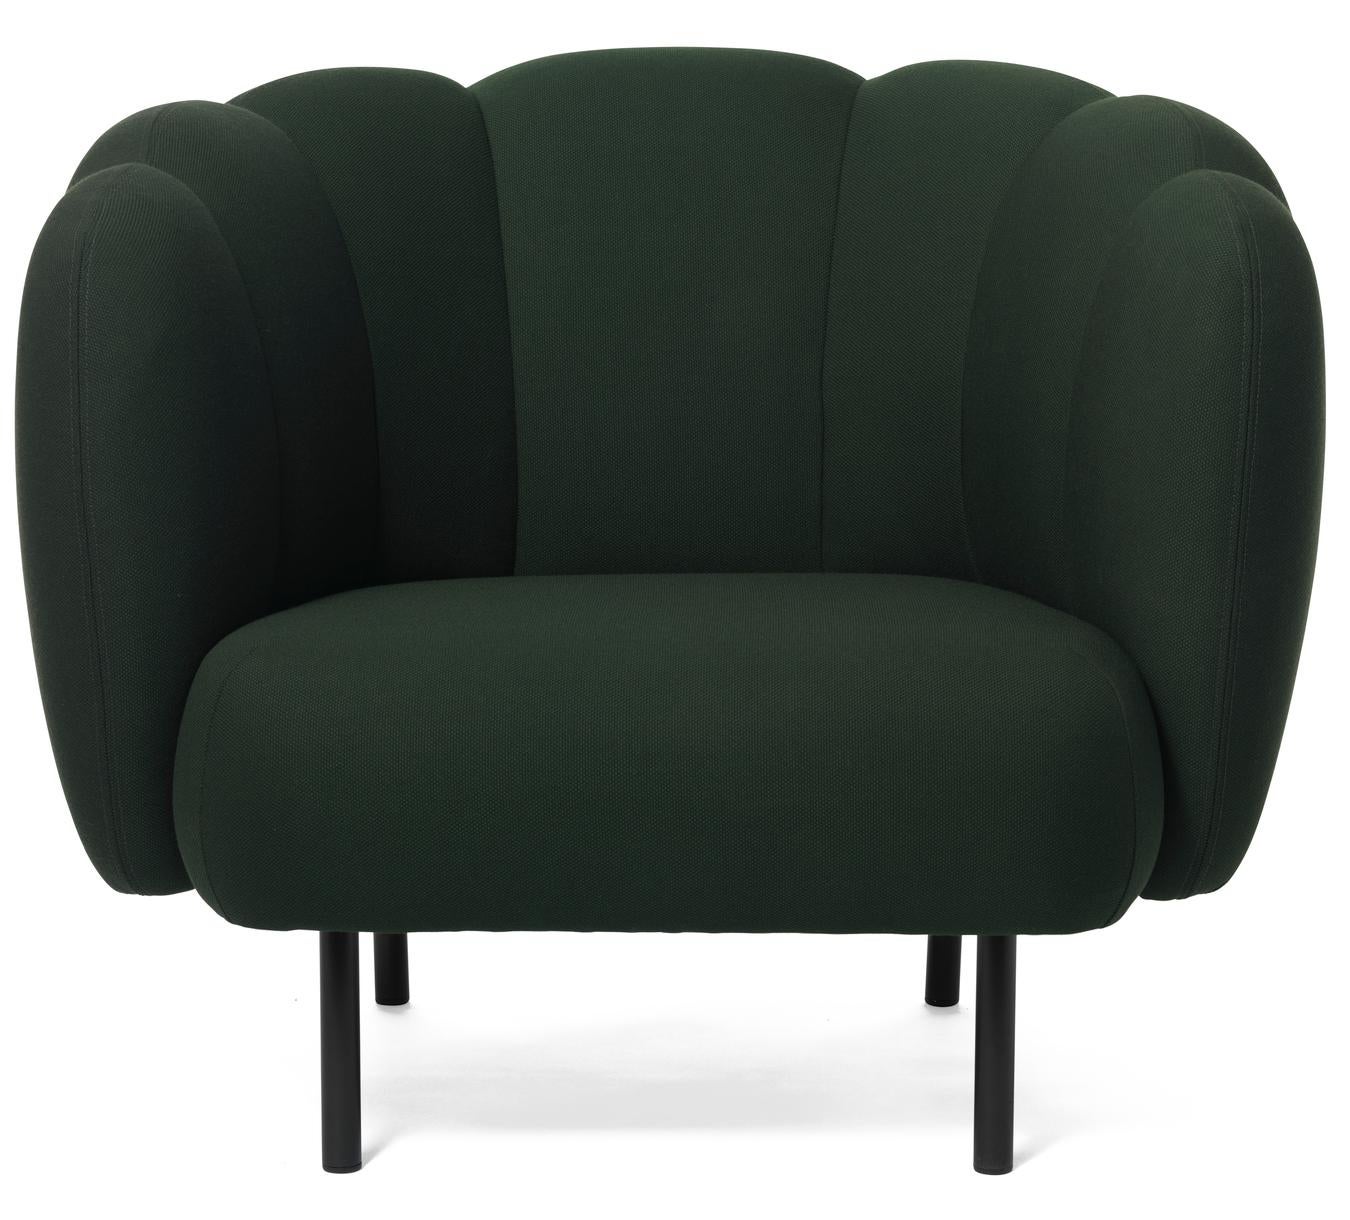 Cape lounge chair with stitches forest green by Warm Nordic
Dimensions: D95 x W84 x H 80 cm
Material: textile upholstery, wooden frame, powder coated black steel legs
Weight: 36.5 kg
Also available in different colours and finishes.

An